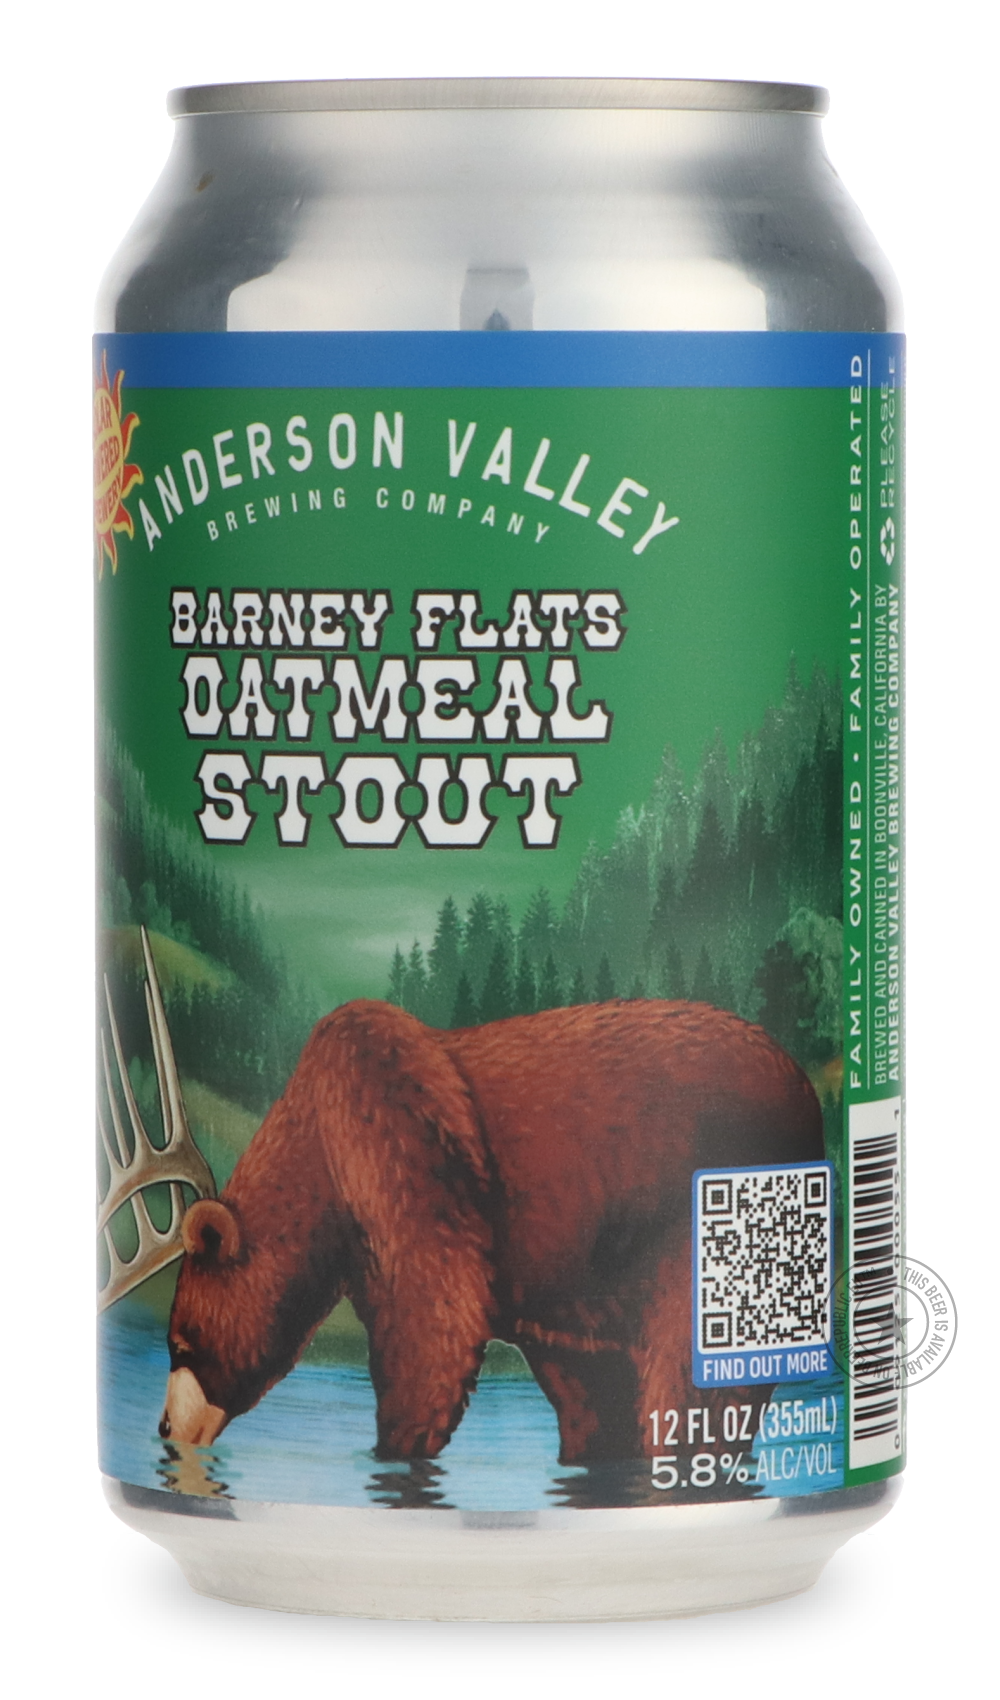 -Anderson Valley- Barney Flats Oatmeal Stout-Stout & Porter- Only @ Beer Republic - The best online beer store for American & Canadian craft beer - Buy beer online from the USA and Canada - Bier online kopen - Amerikaans bier kopen - Craft beer store - Craft beer kopen - Amerikanisch bier kaufen - Bier online kaufen - Acheter biere online - IPA - Stout - Porter - New England IPA - Hazy IPA - Imperial Stout - Barrel Aged - Barrel Aged Imperial Stout - Brown - Dark beer - Blond - Blonde - Pilsner - Lager - Wh